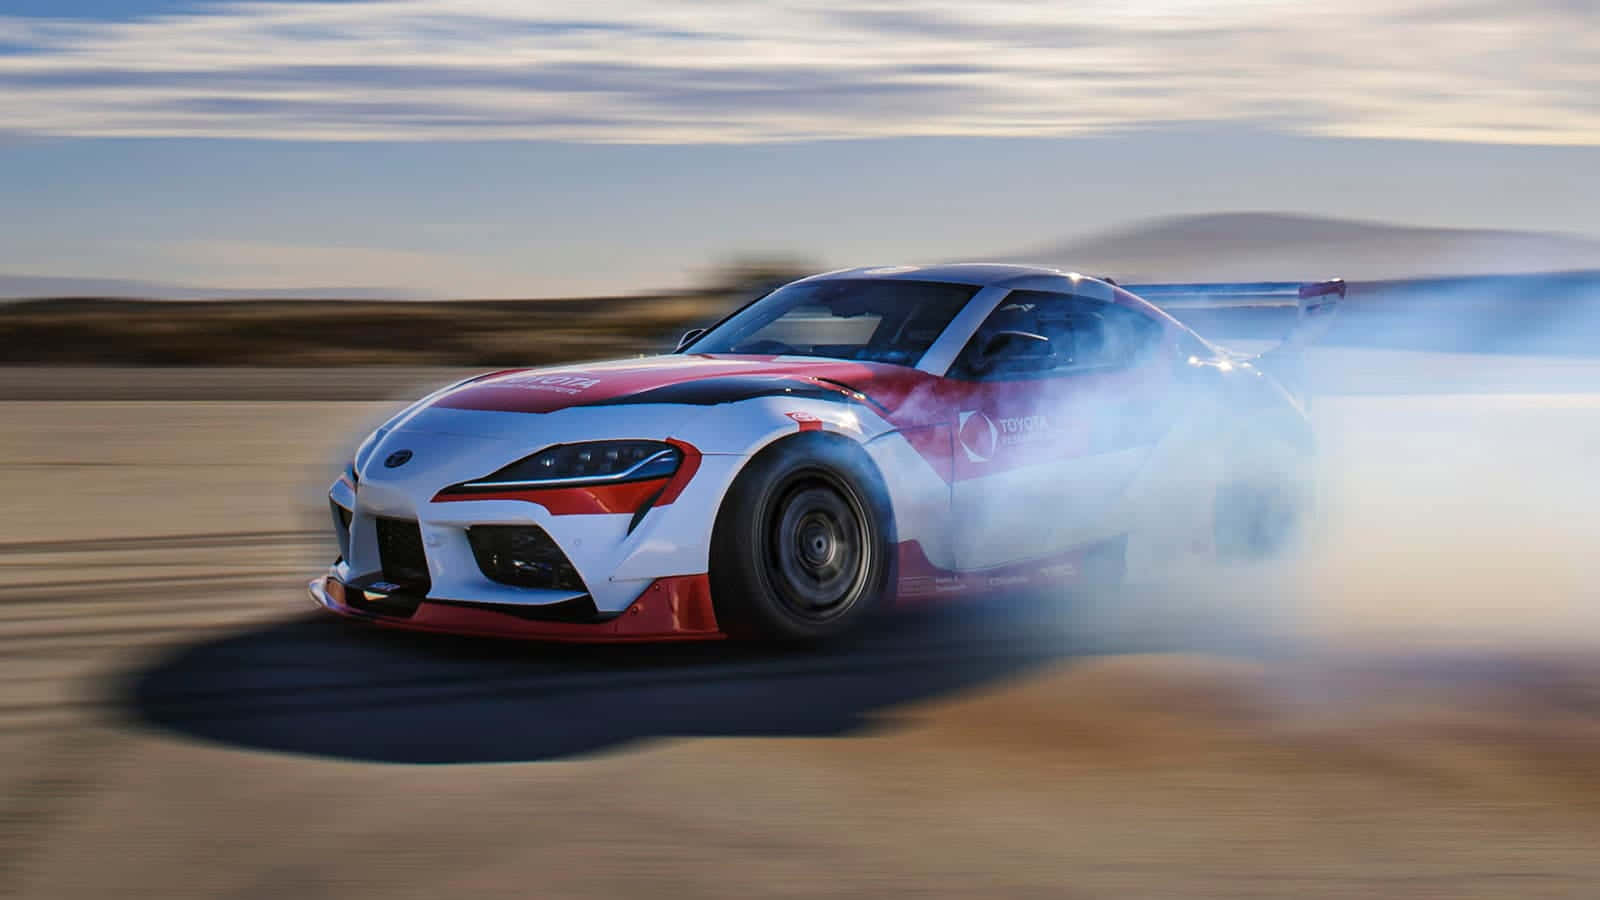 Speed through the roads with the Supra Drift Wallpaper